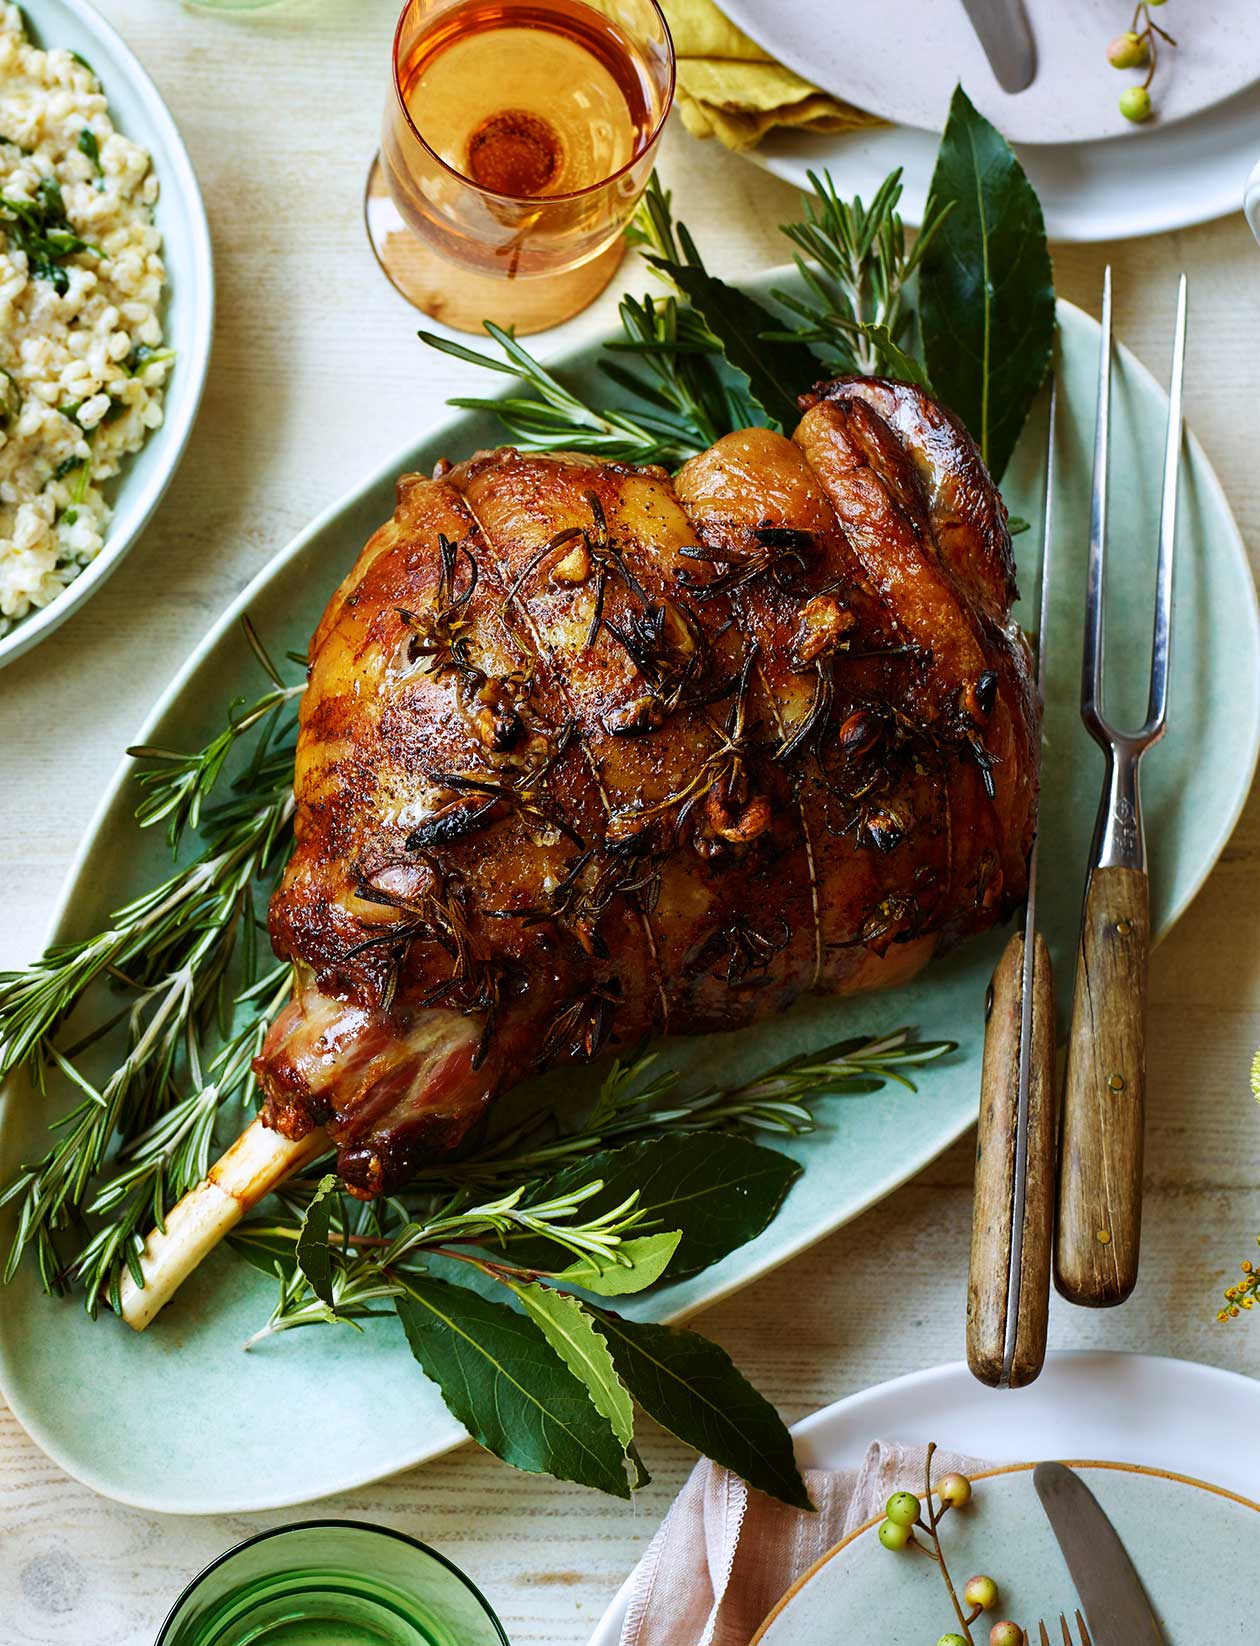 Feasting on a Simple Bone-in Leg of Lamb Recipe is a delight!